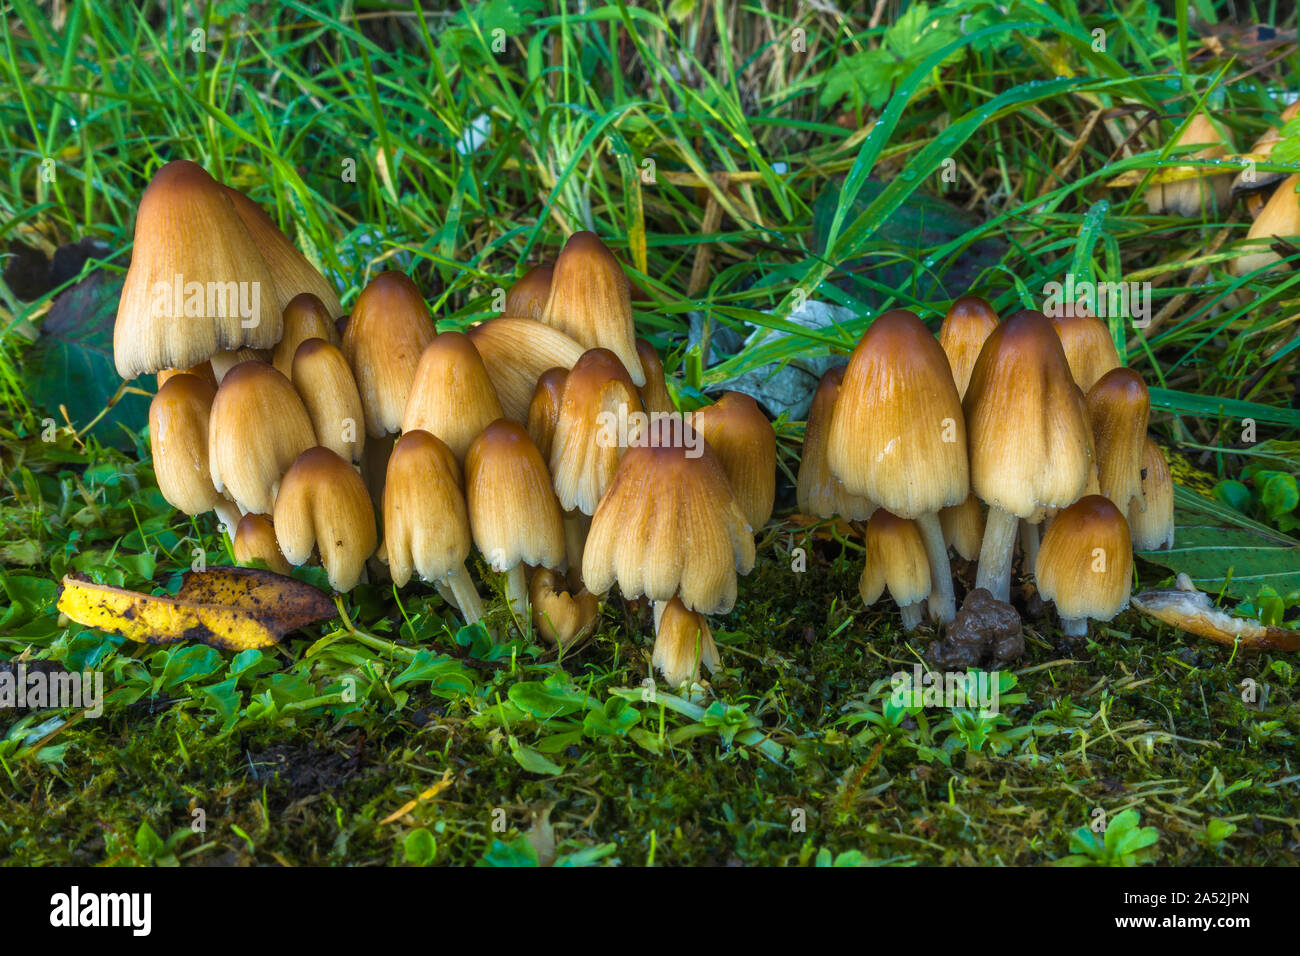 Mushrooms at Hafland Barns, East Lothian, Scotland. Most likely a Glistening Inkcap or Mica Inkcap (Coprinellus micaceus). Stock Photo